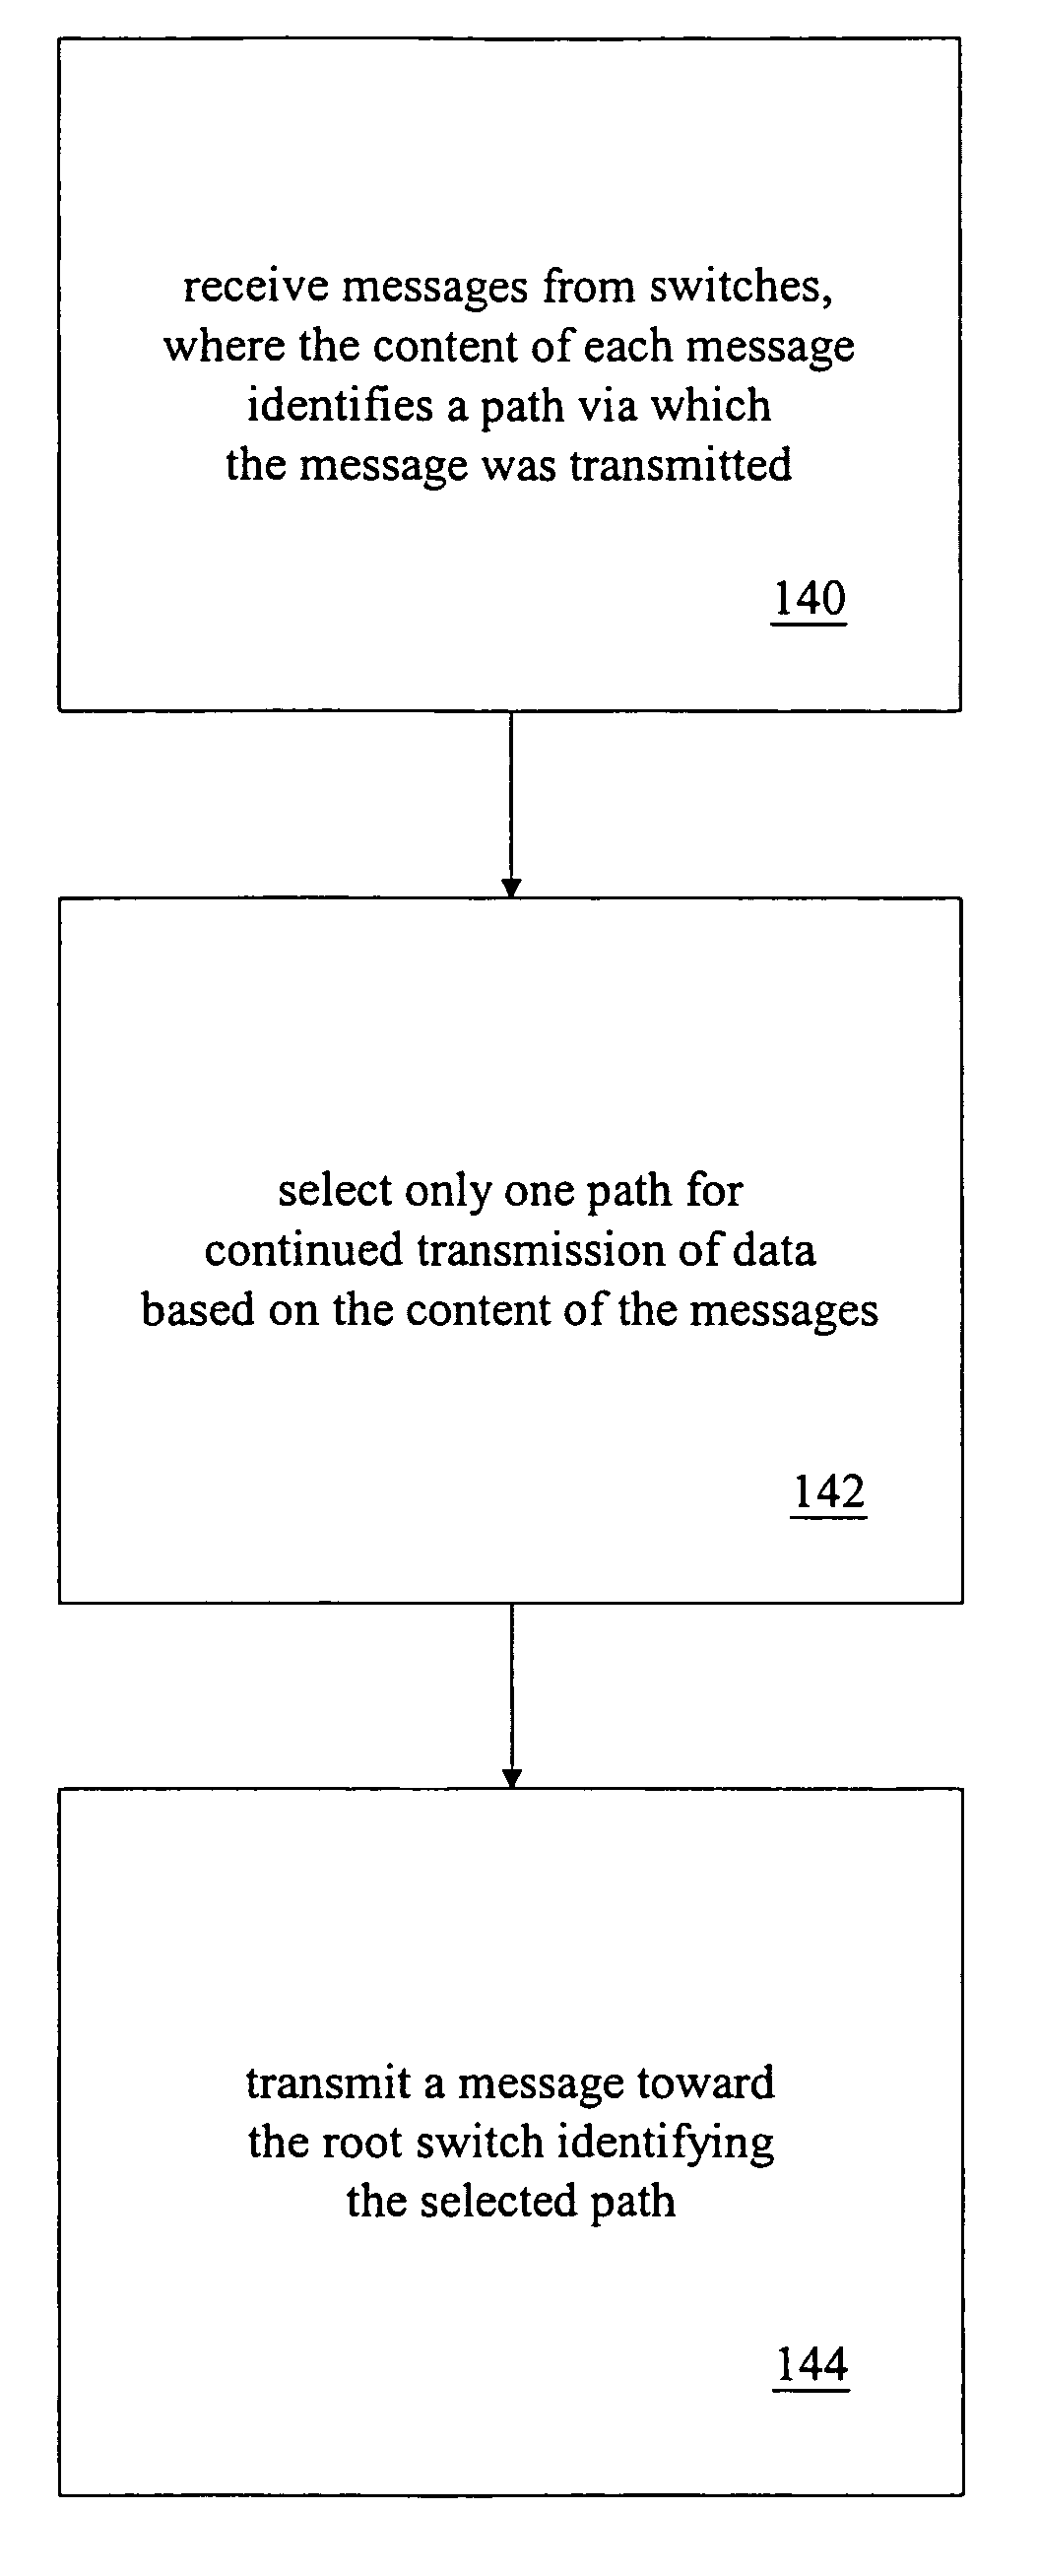 Method and system for maintaining a loop-free topology across multiple spanning trees in a virtual local area network